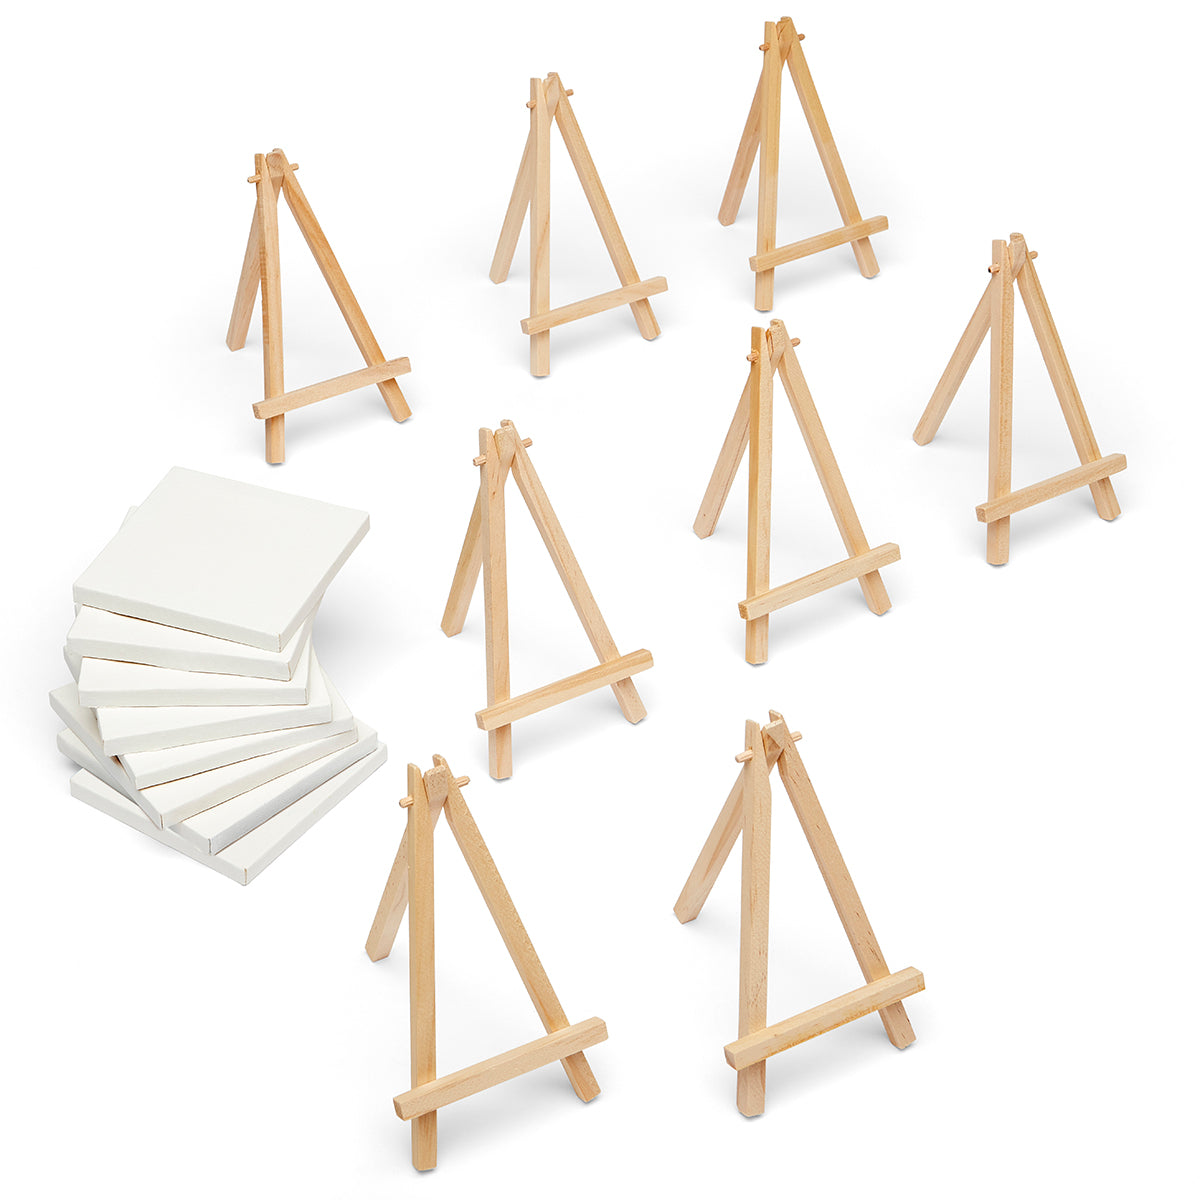 4 By 4 Inch Mini Canvas And 8*16cm Mini Wood Easel Set For Painting Drawing  School Student Artist Supplies, 12 Pack 